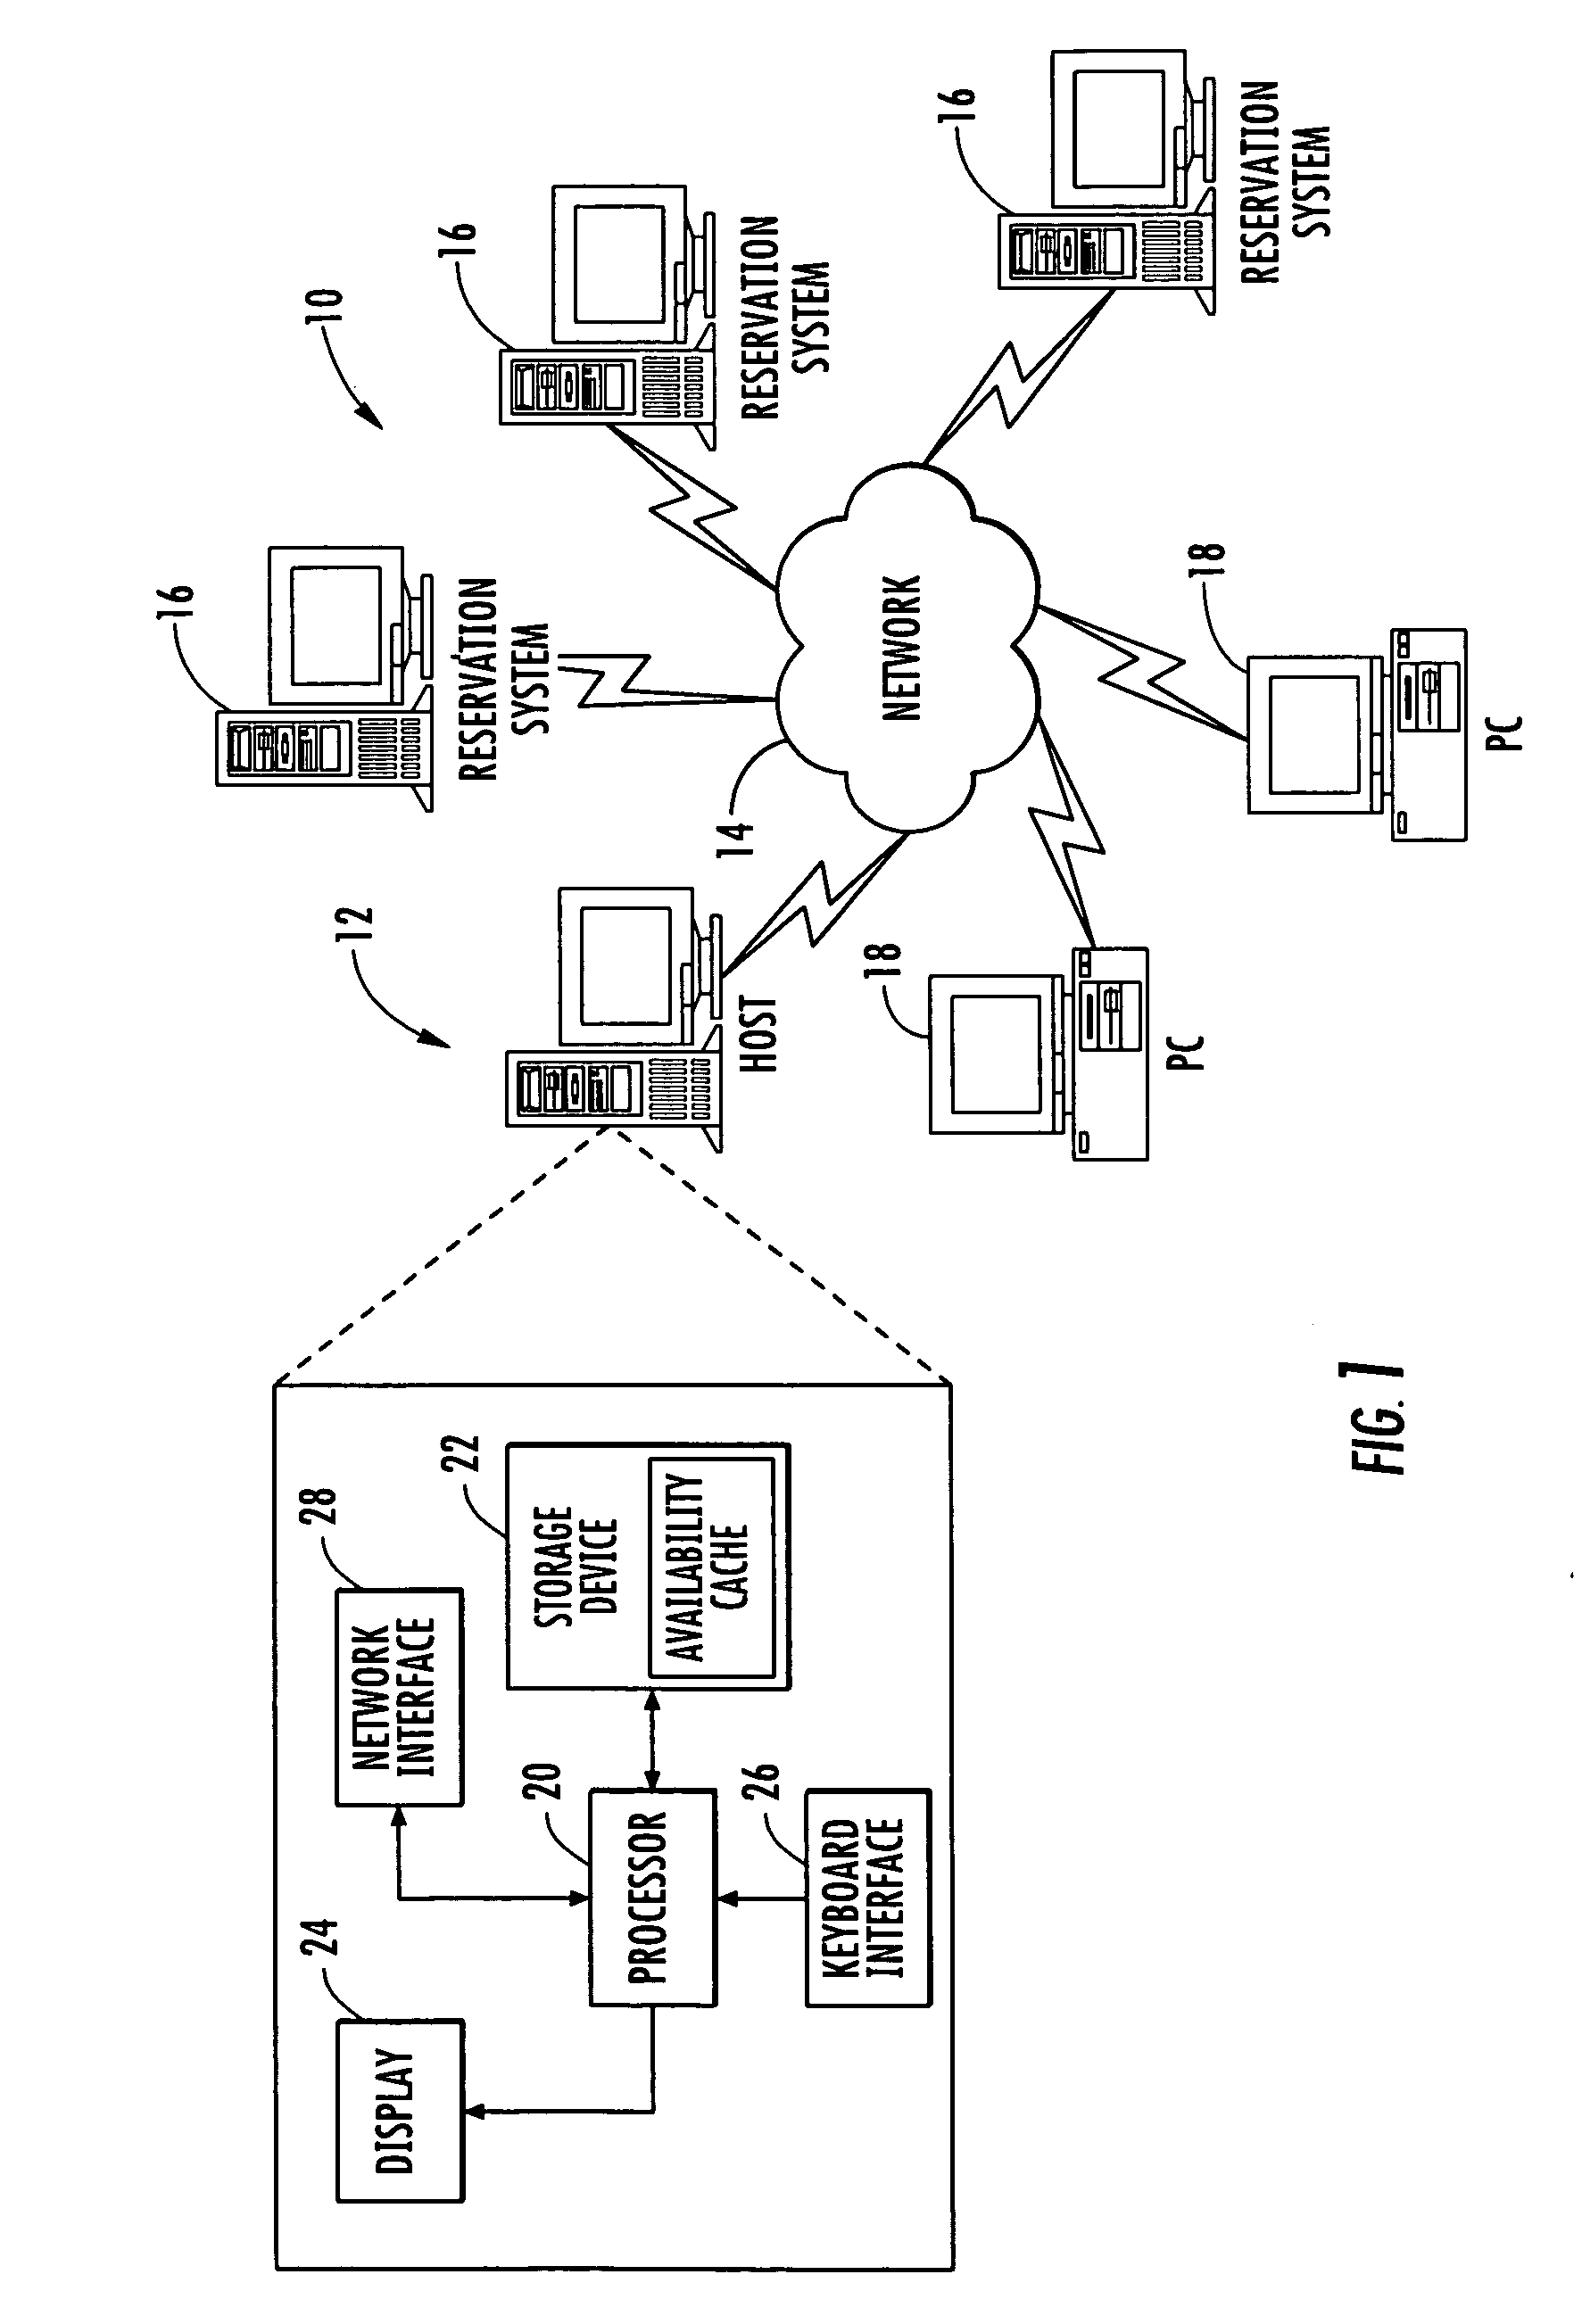 System, method, and computer program product for reducing the burden on inventory system by displaying product availability information for a range of parameters related to a product